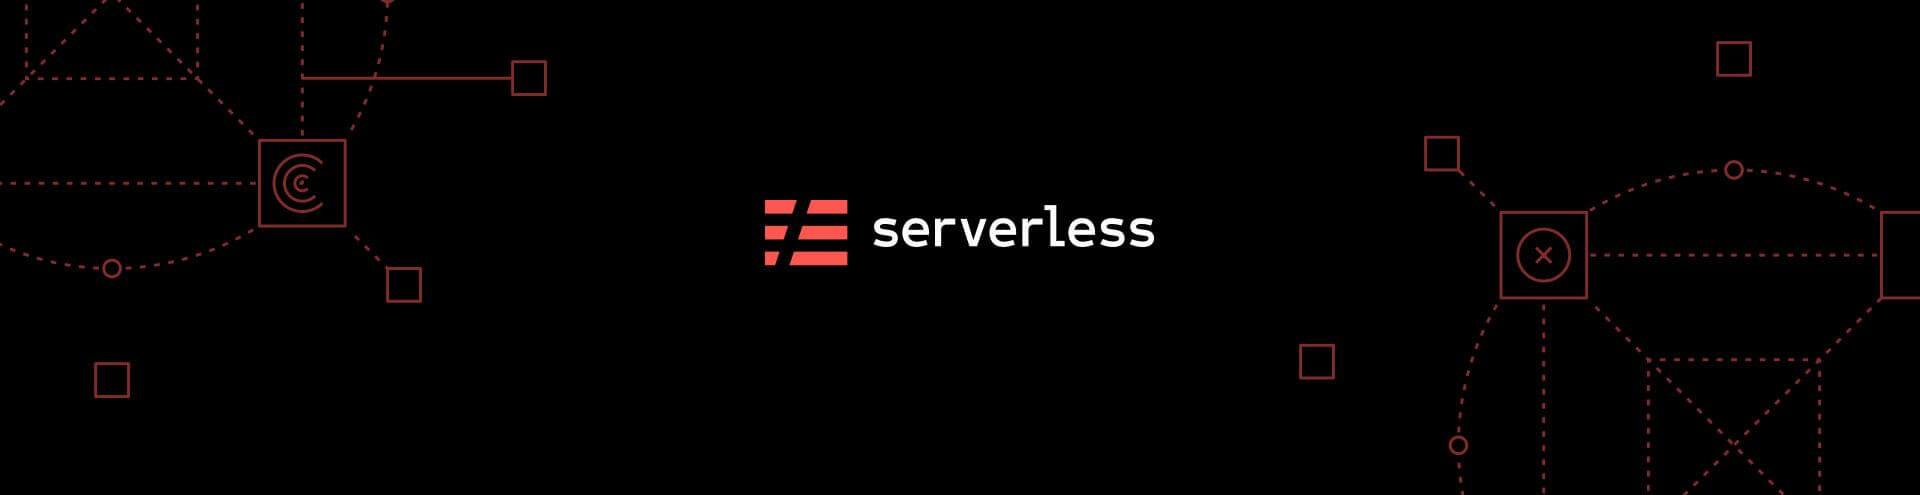 Serverless Architecture: When to Use This Approach and What Benefits It Gives